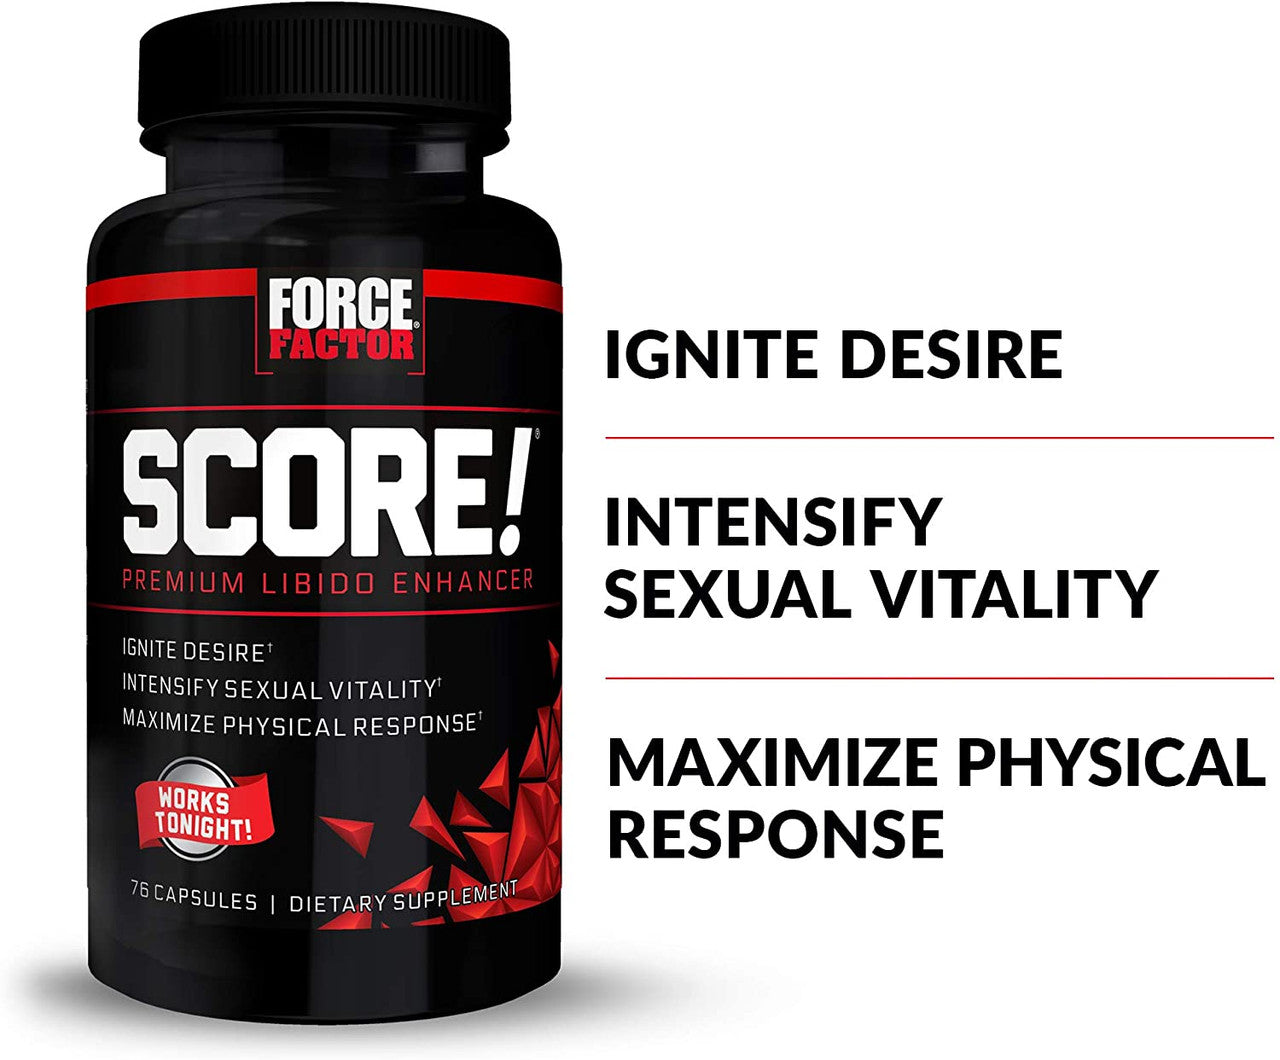 Force Factor Score usages